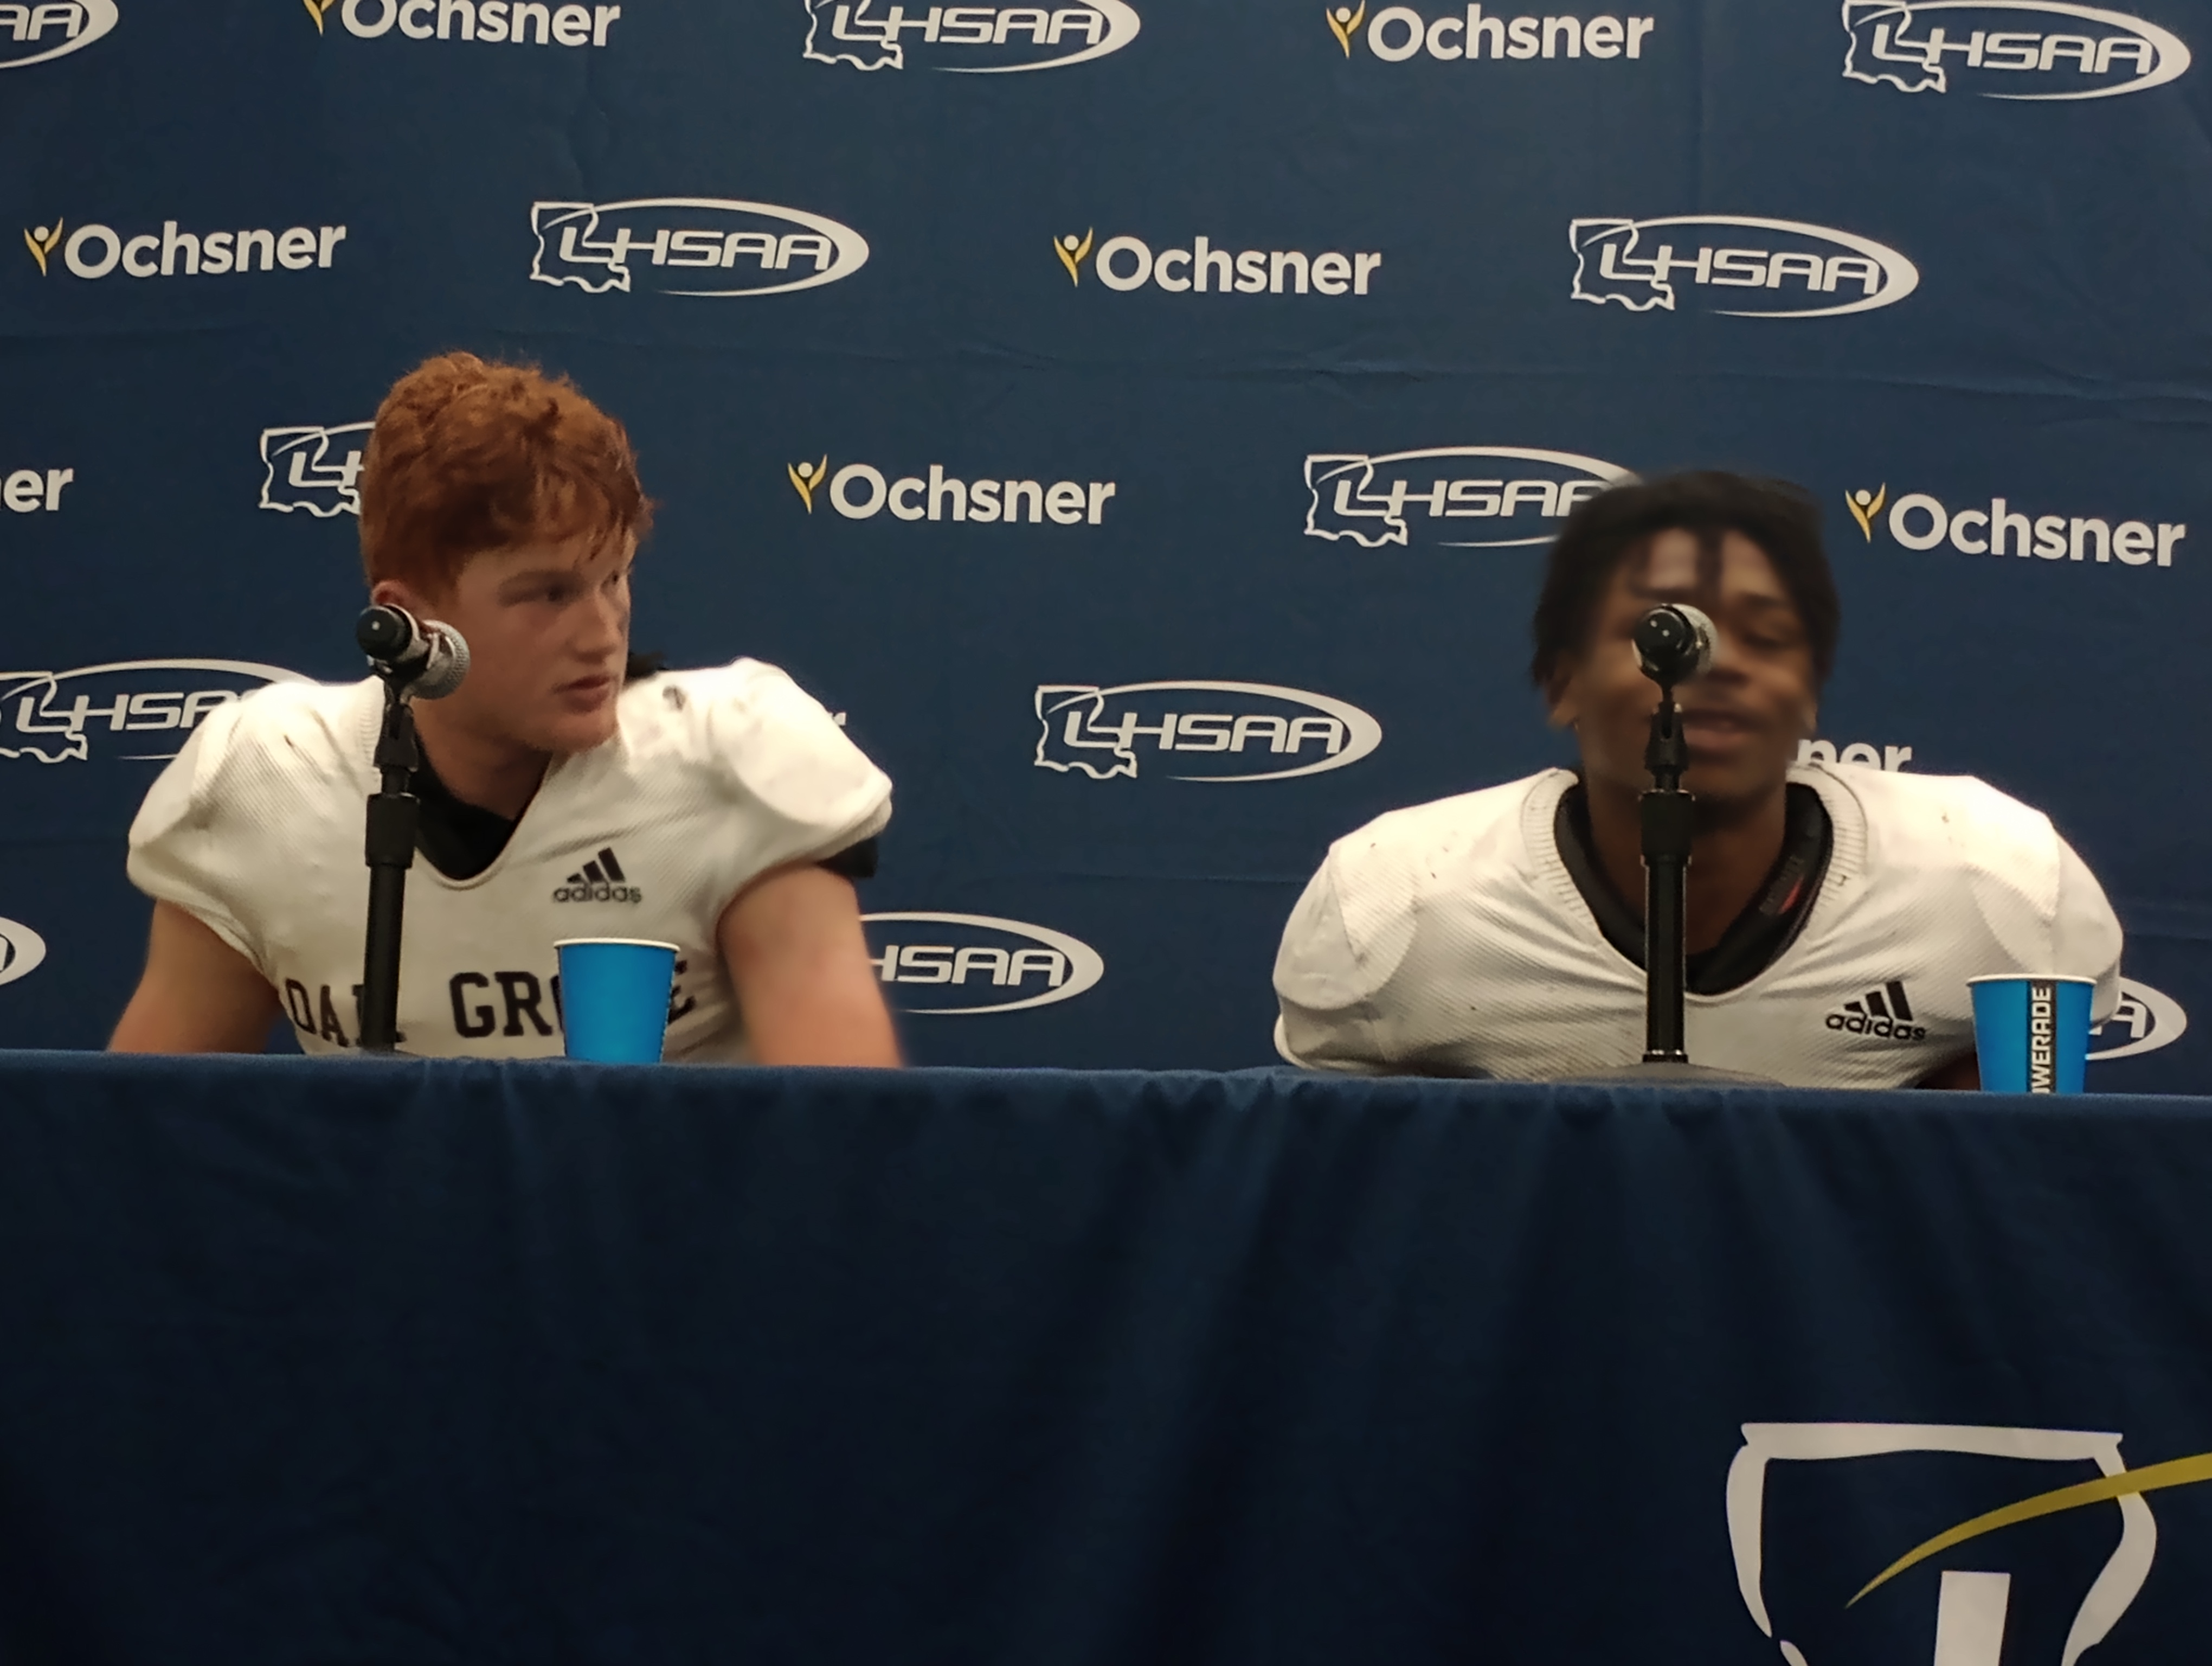 From left, Oak Grove QB Jackson Bradley and TB Decorian Freeman, who combined to rush for 237 yards while each scored a TD in the Tigers' 17-0 win against Homer for the Division IV non-select championship on Dec. 8, 2022.